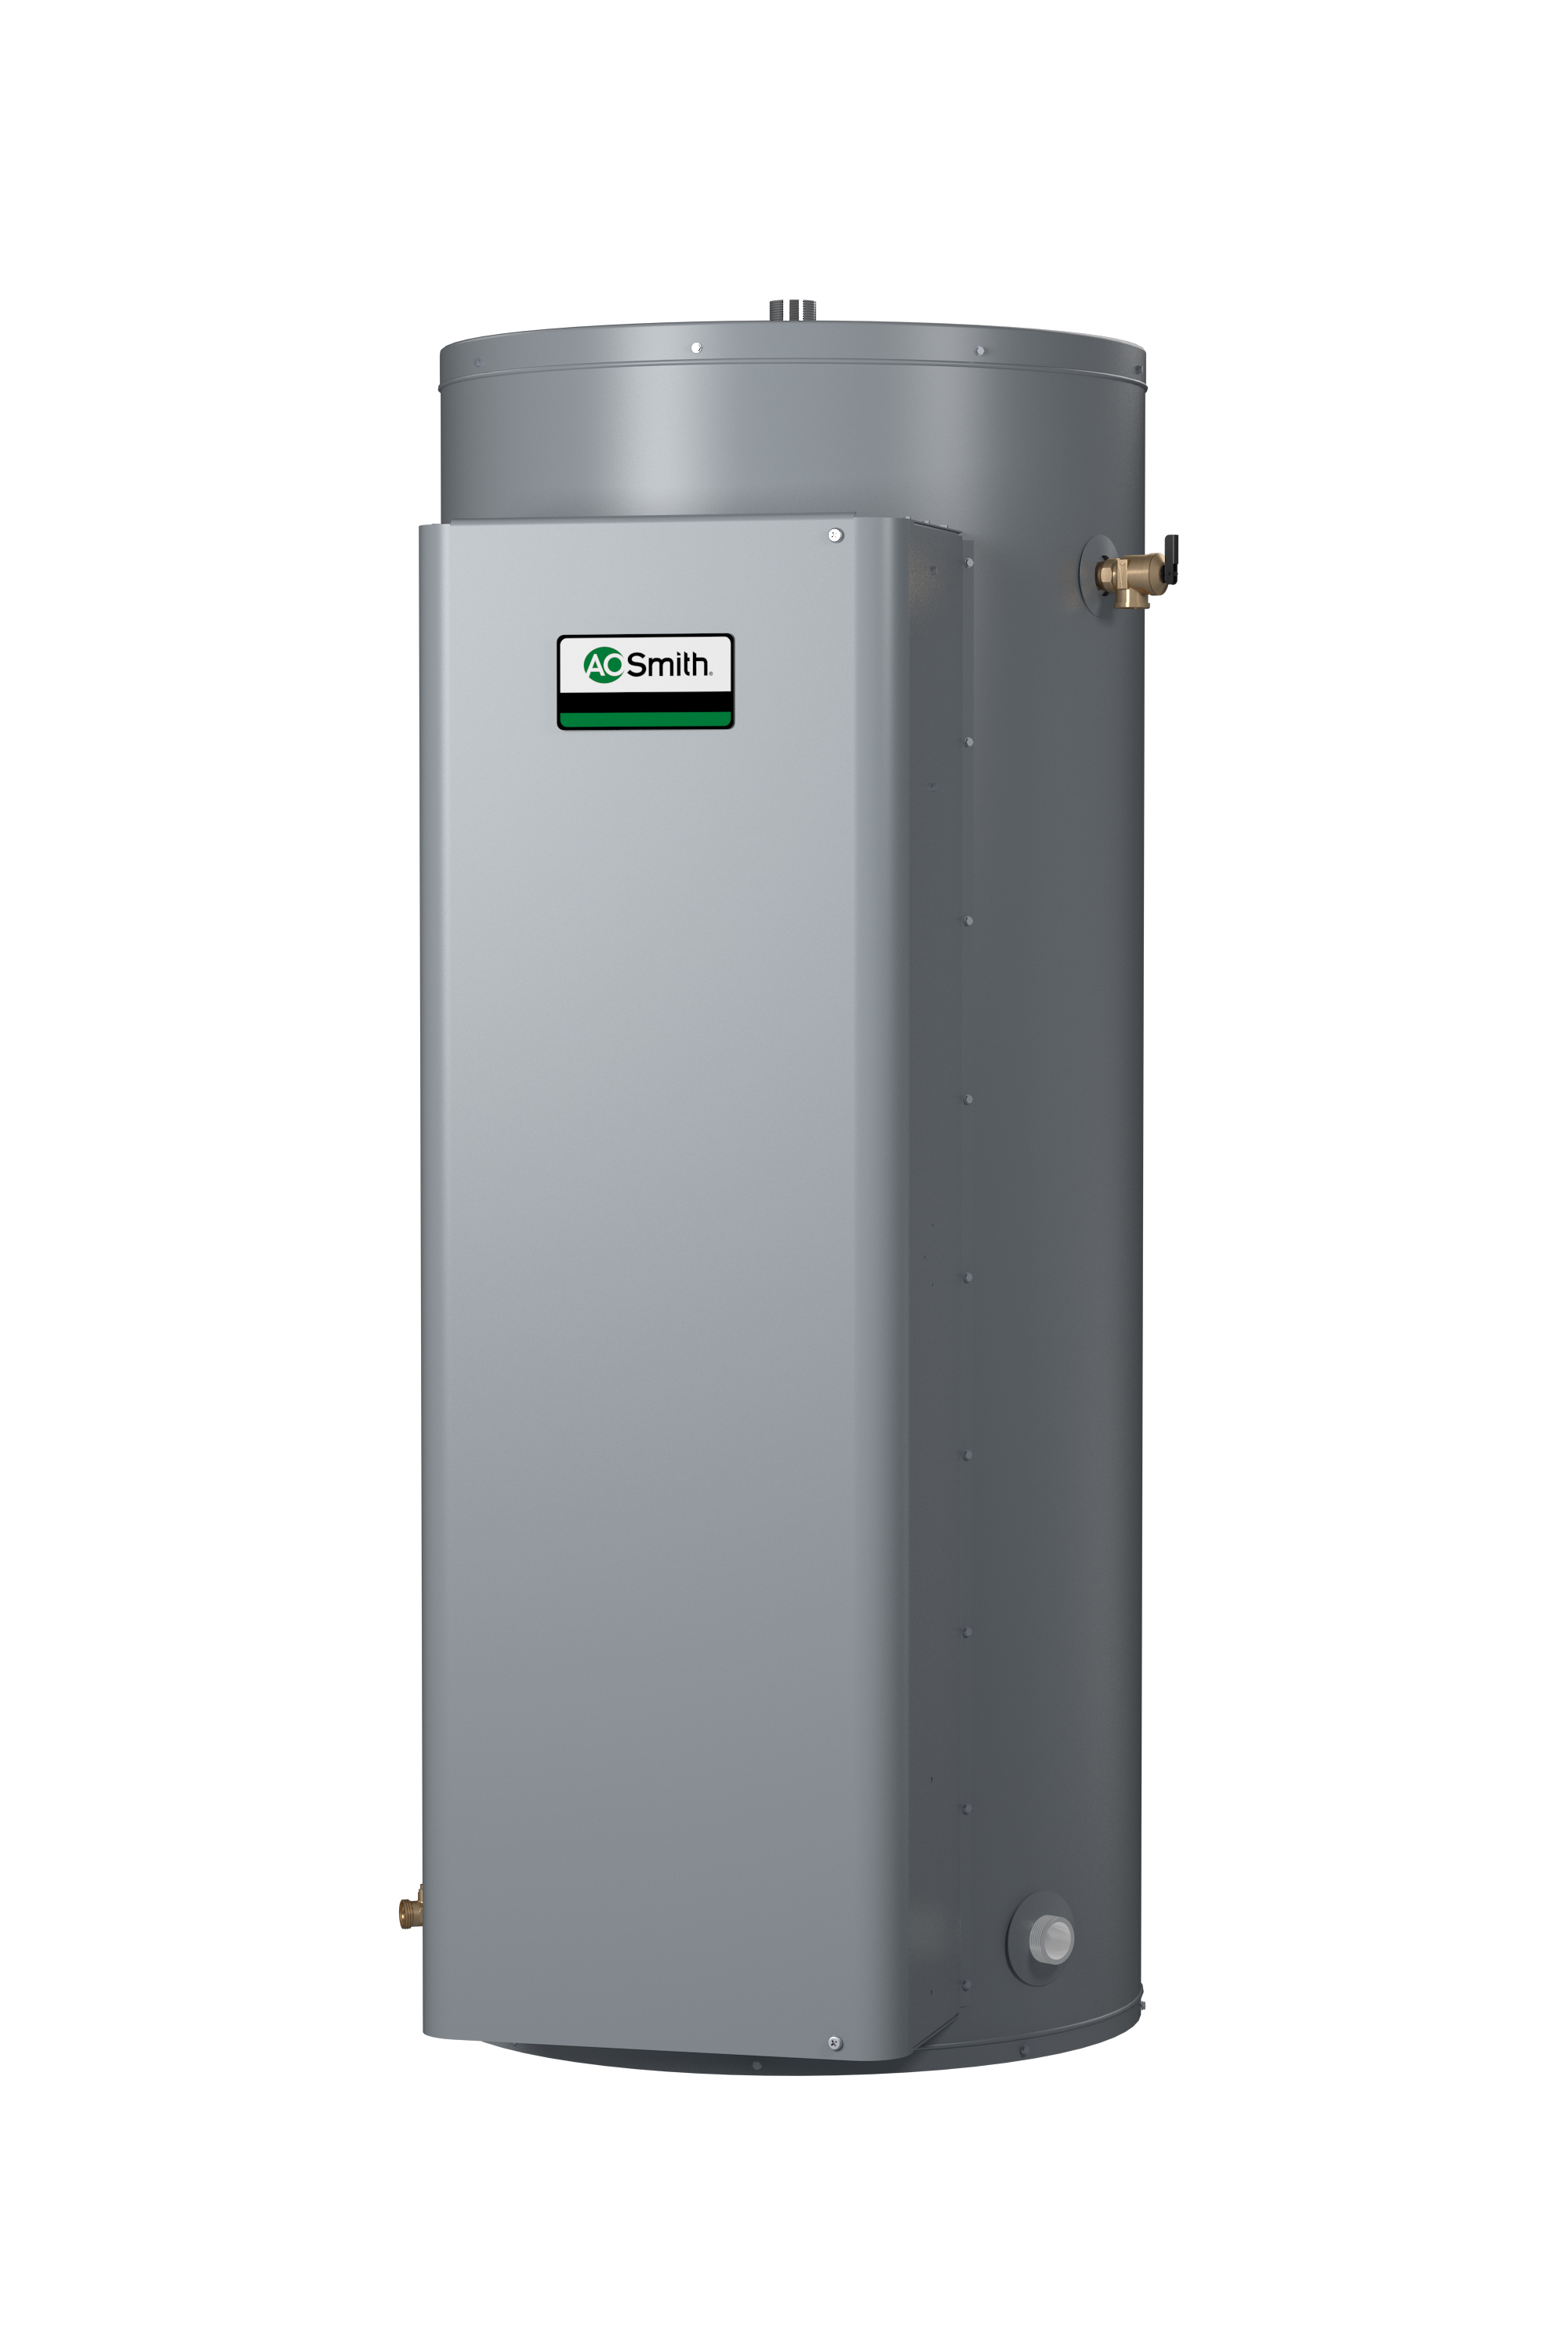 AO SMITH DRE-120A-12, 119 GALLON, 12.3KW, 208 VOLT, 33.3 AMPS, 3 PHASE, 3 ELEMENT, ASME COMMERCIAL ELECTRIC WATER HEATER, GOLD SERIES